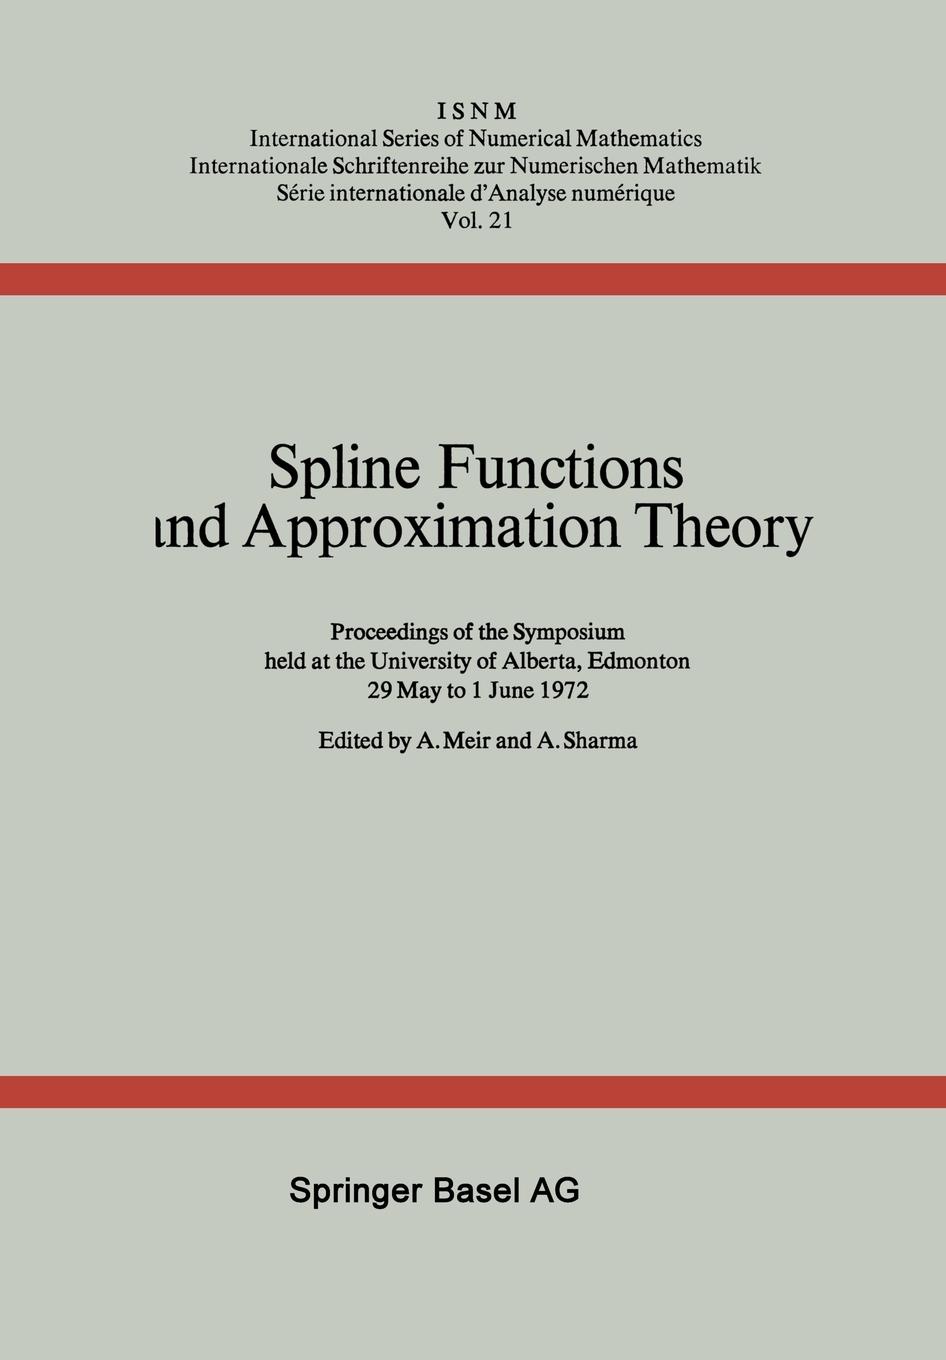 Spline Functions and Approximation Theory. Proceedings of the Symposium Held at the University of Alberta, Edmonton May 29 to June 1, 1972